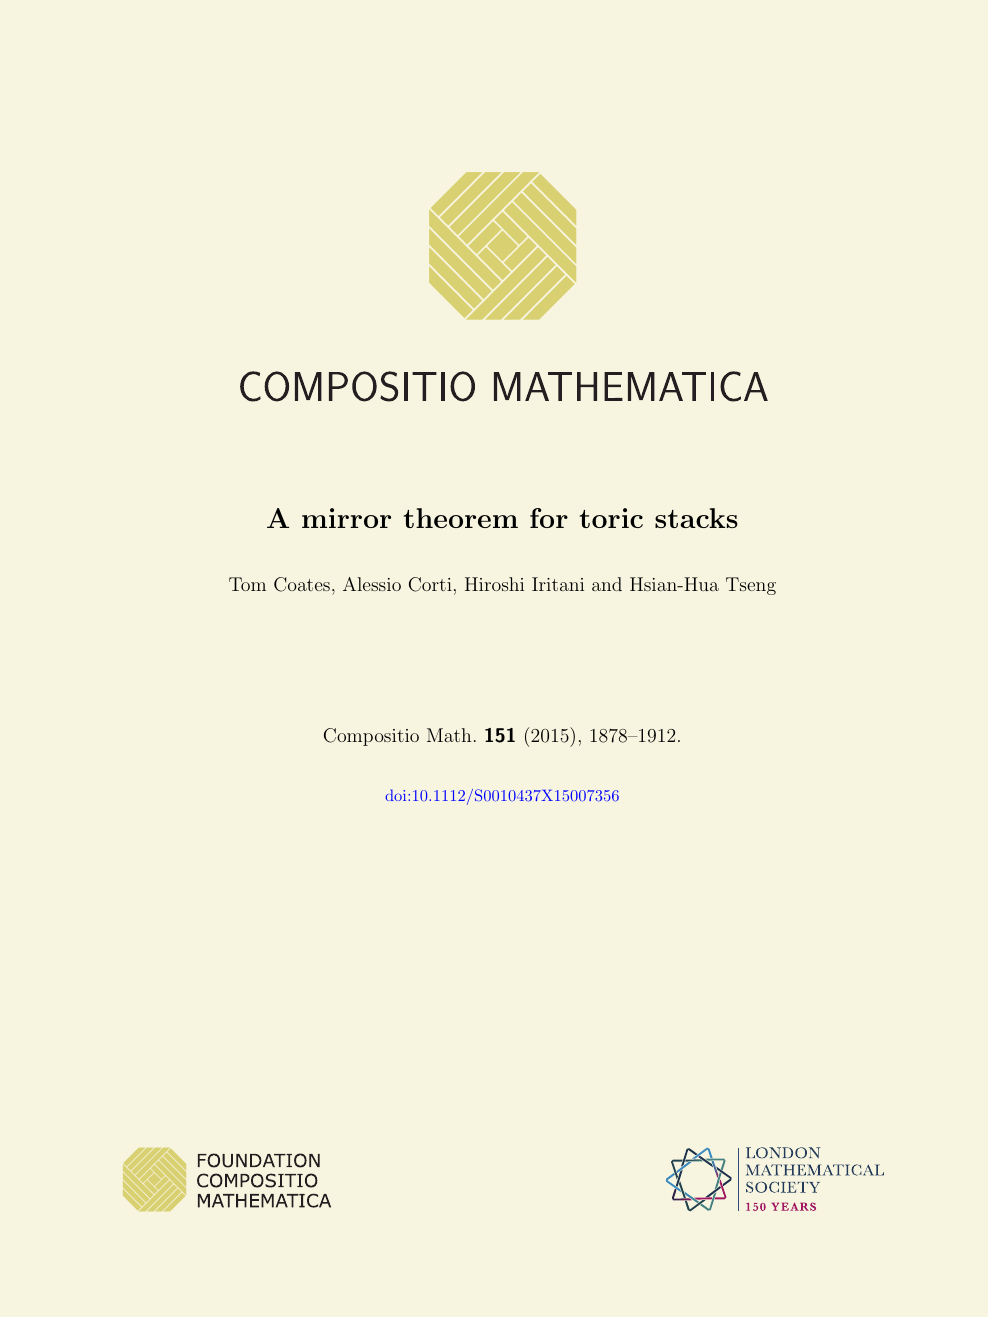 A Mirror Theorem For Toric Stacks Topic Of Research Paper In Mathematics Download Scholarly Article Pdf And Read For Free On Cyberleninka Open Science Hub